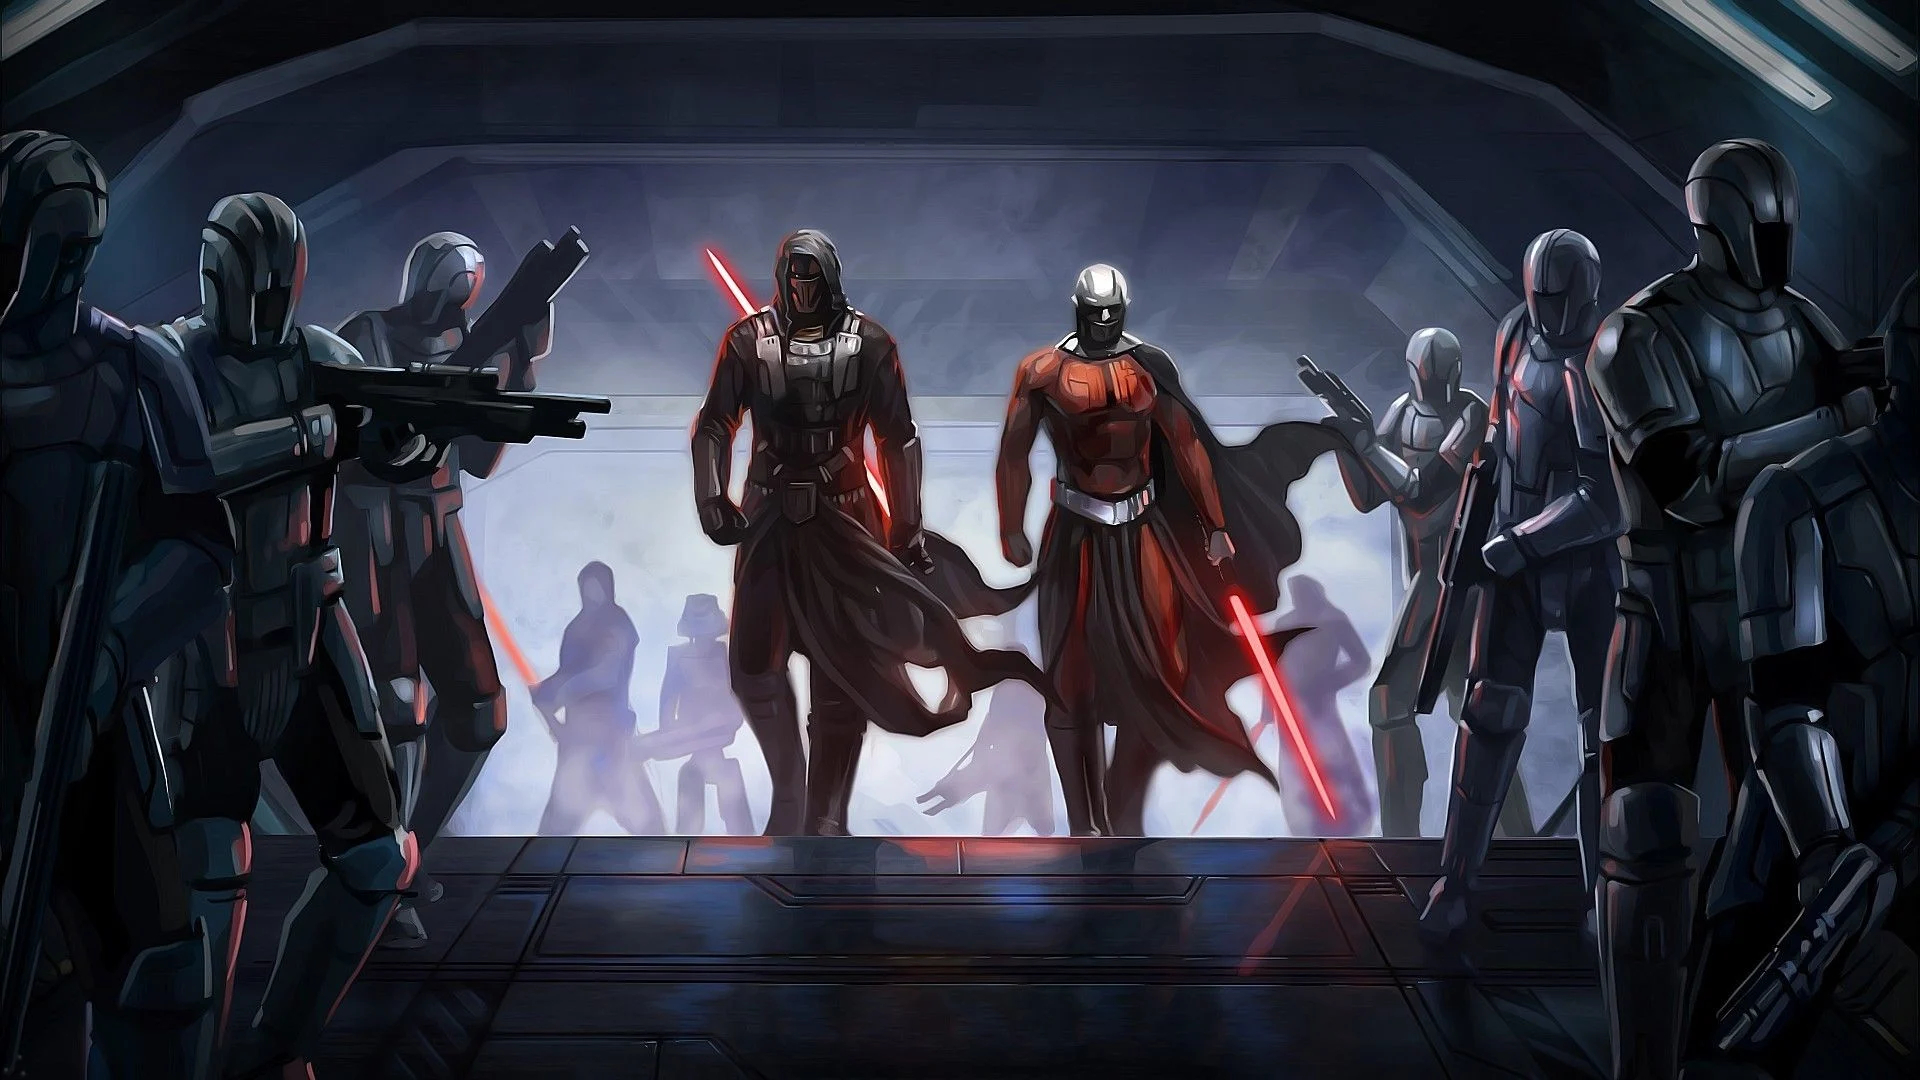 1920x1080 Star Wars: Knights of the Old Republic Wallpapers Top Free Star Wars: Knights of the Old Republic Backgrounds